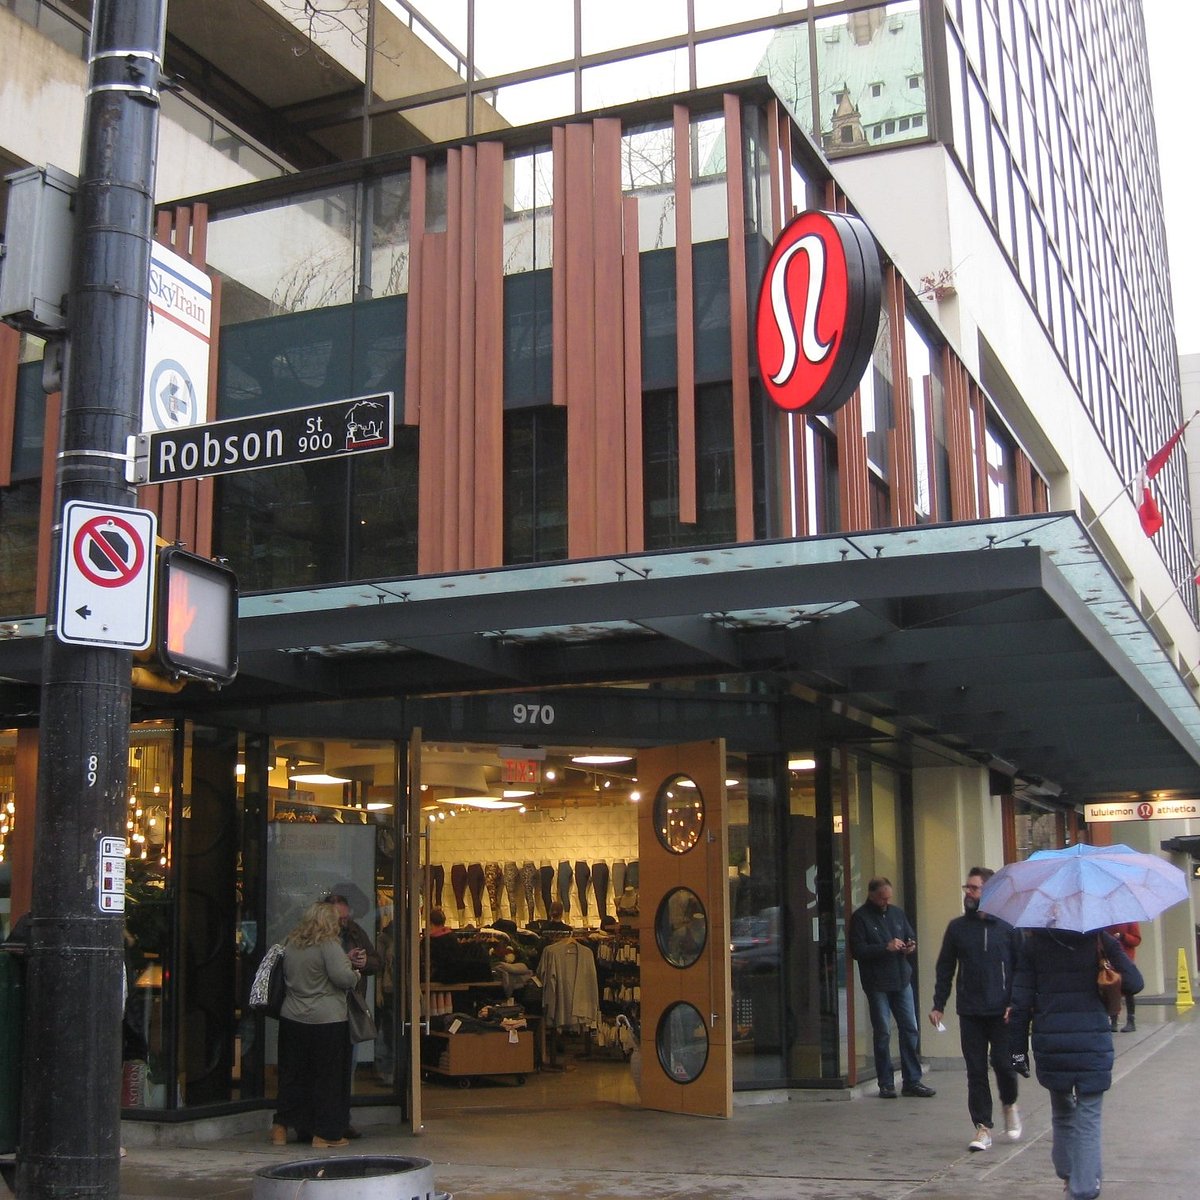 Lululemon's flagship Robson Street location is closing for a glow-up